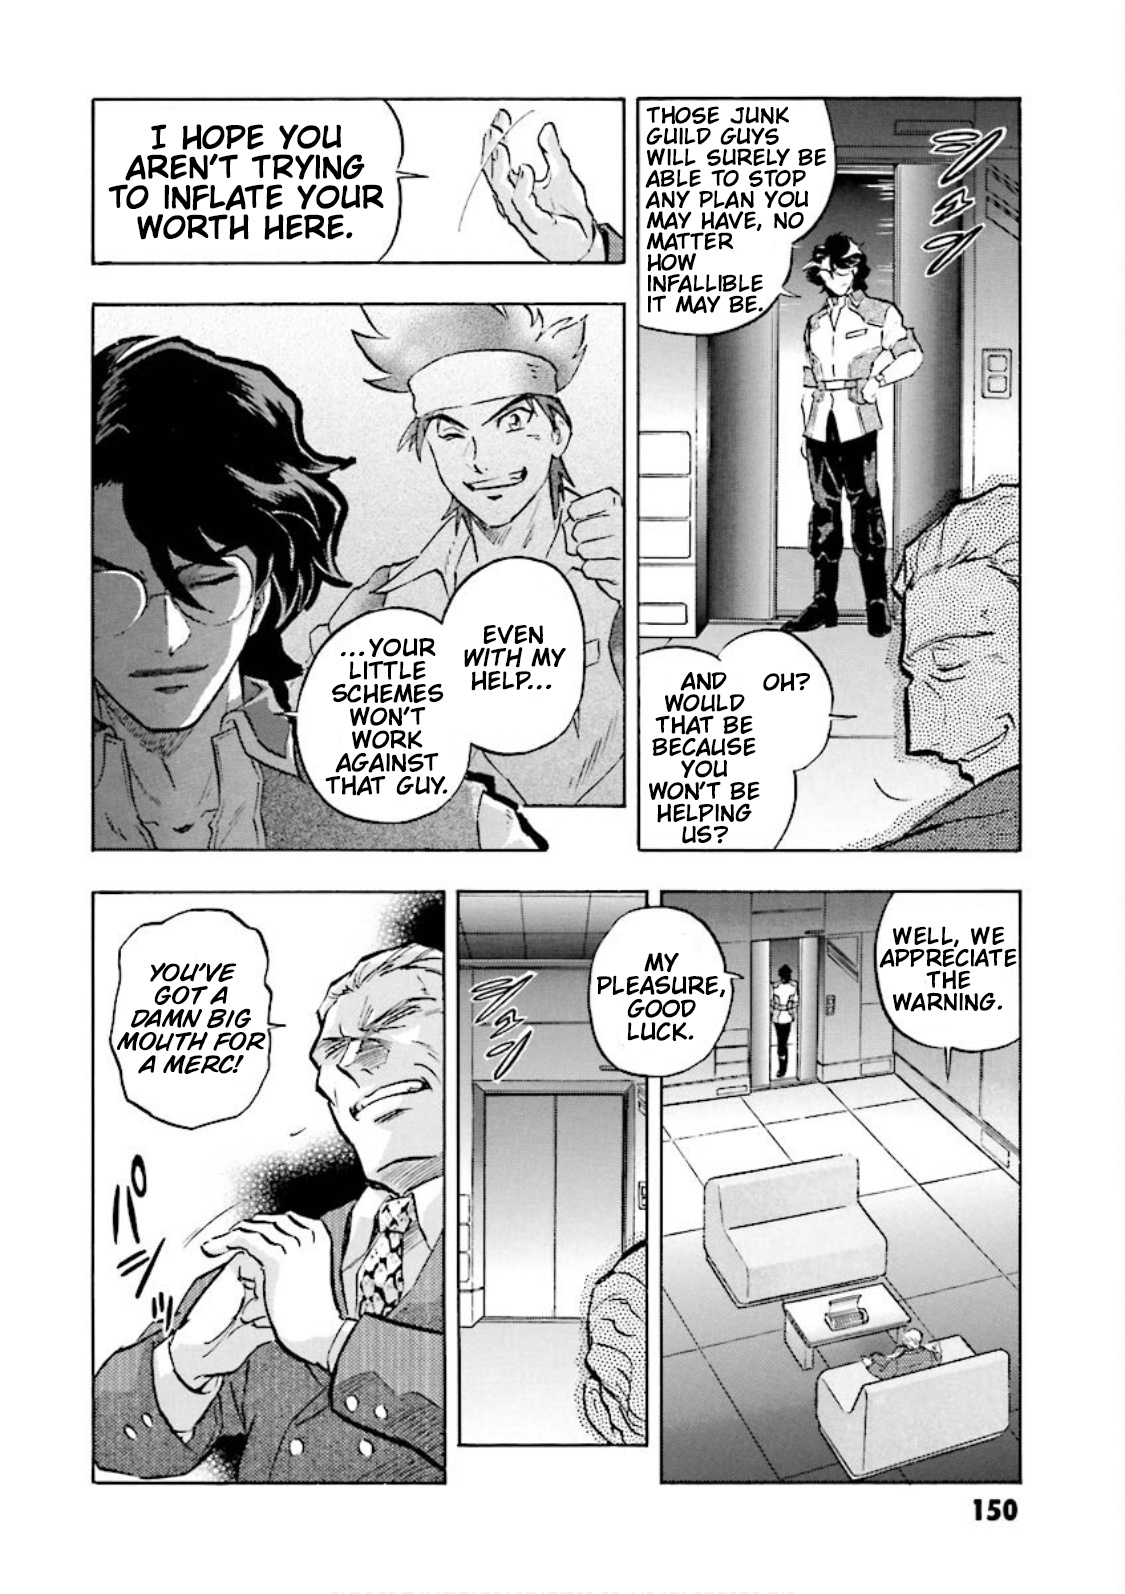 Mobile Suit Gundam Seed Astray Re:master Edition - Page 4